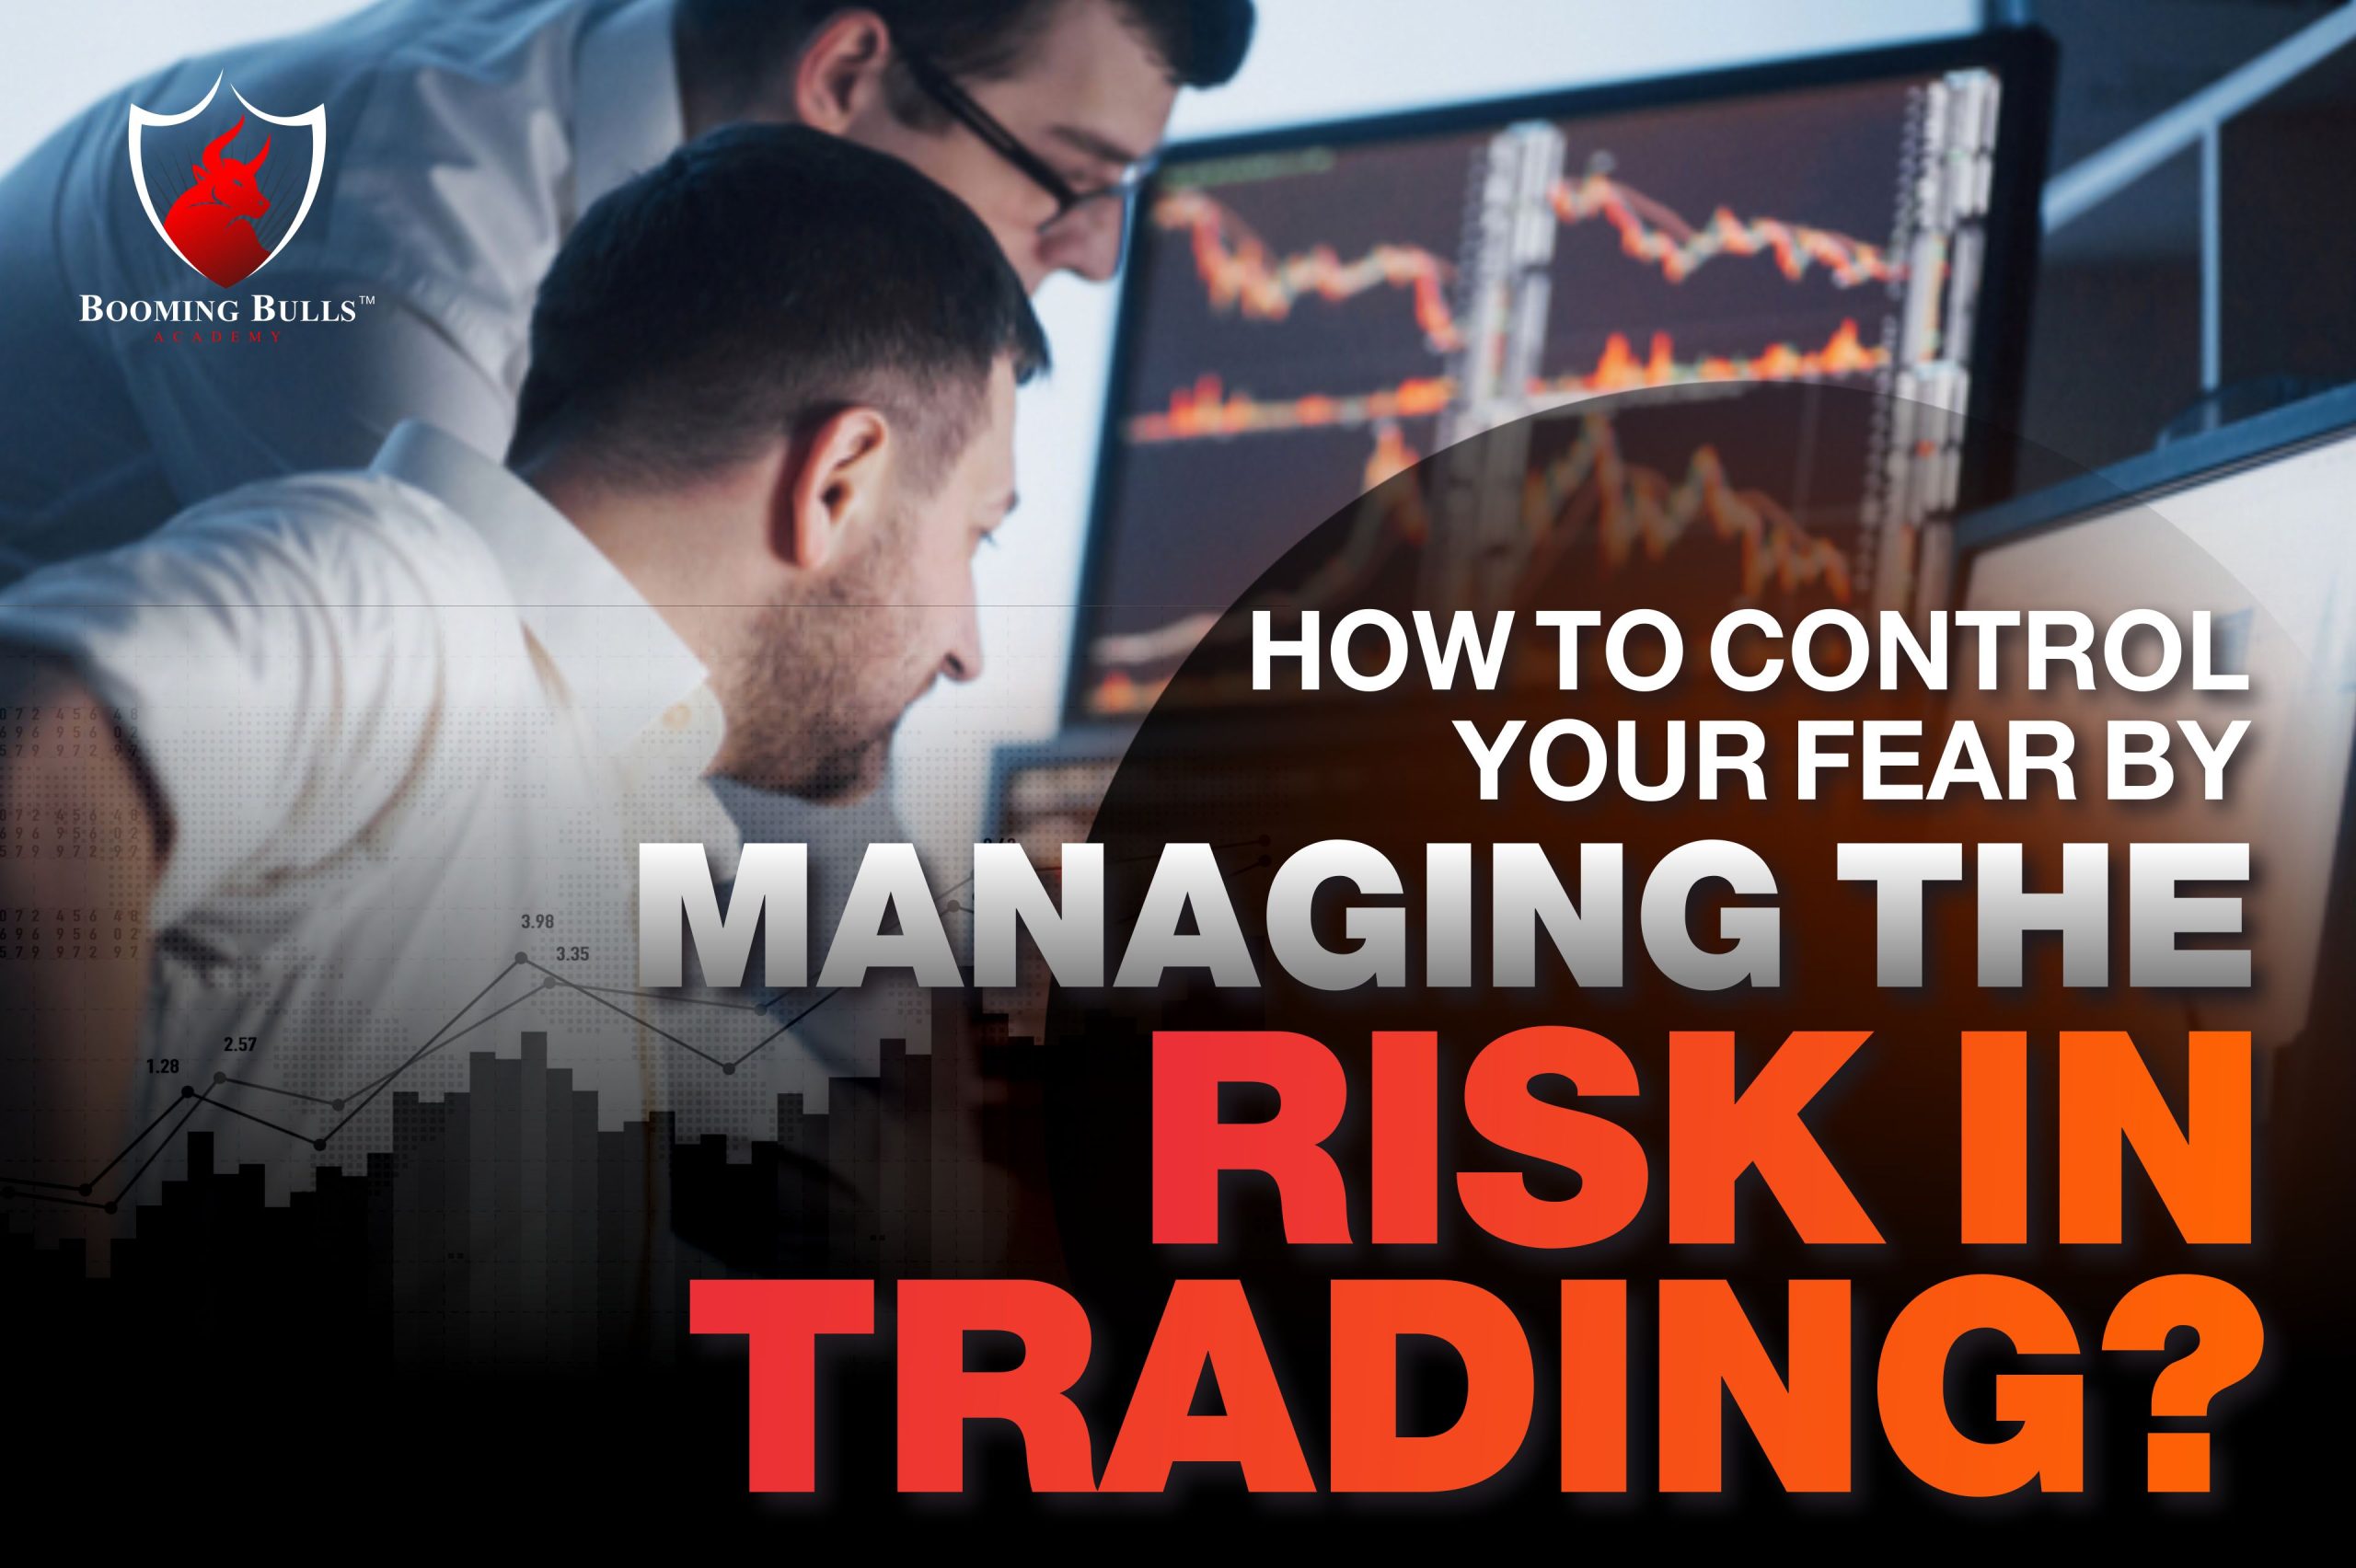 How to Control Your Fear By Managing The Risk in Trading?